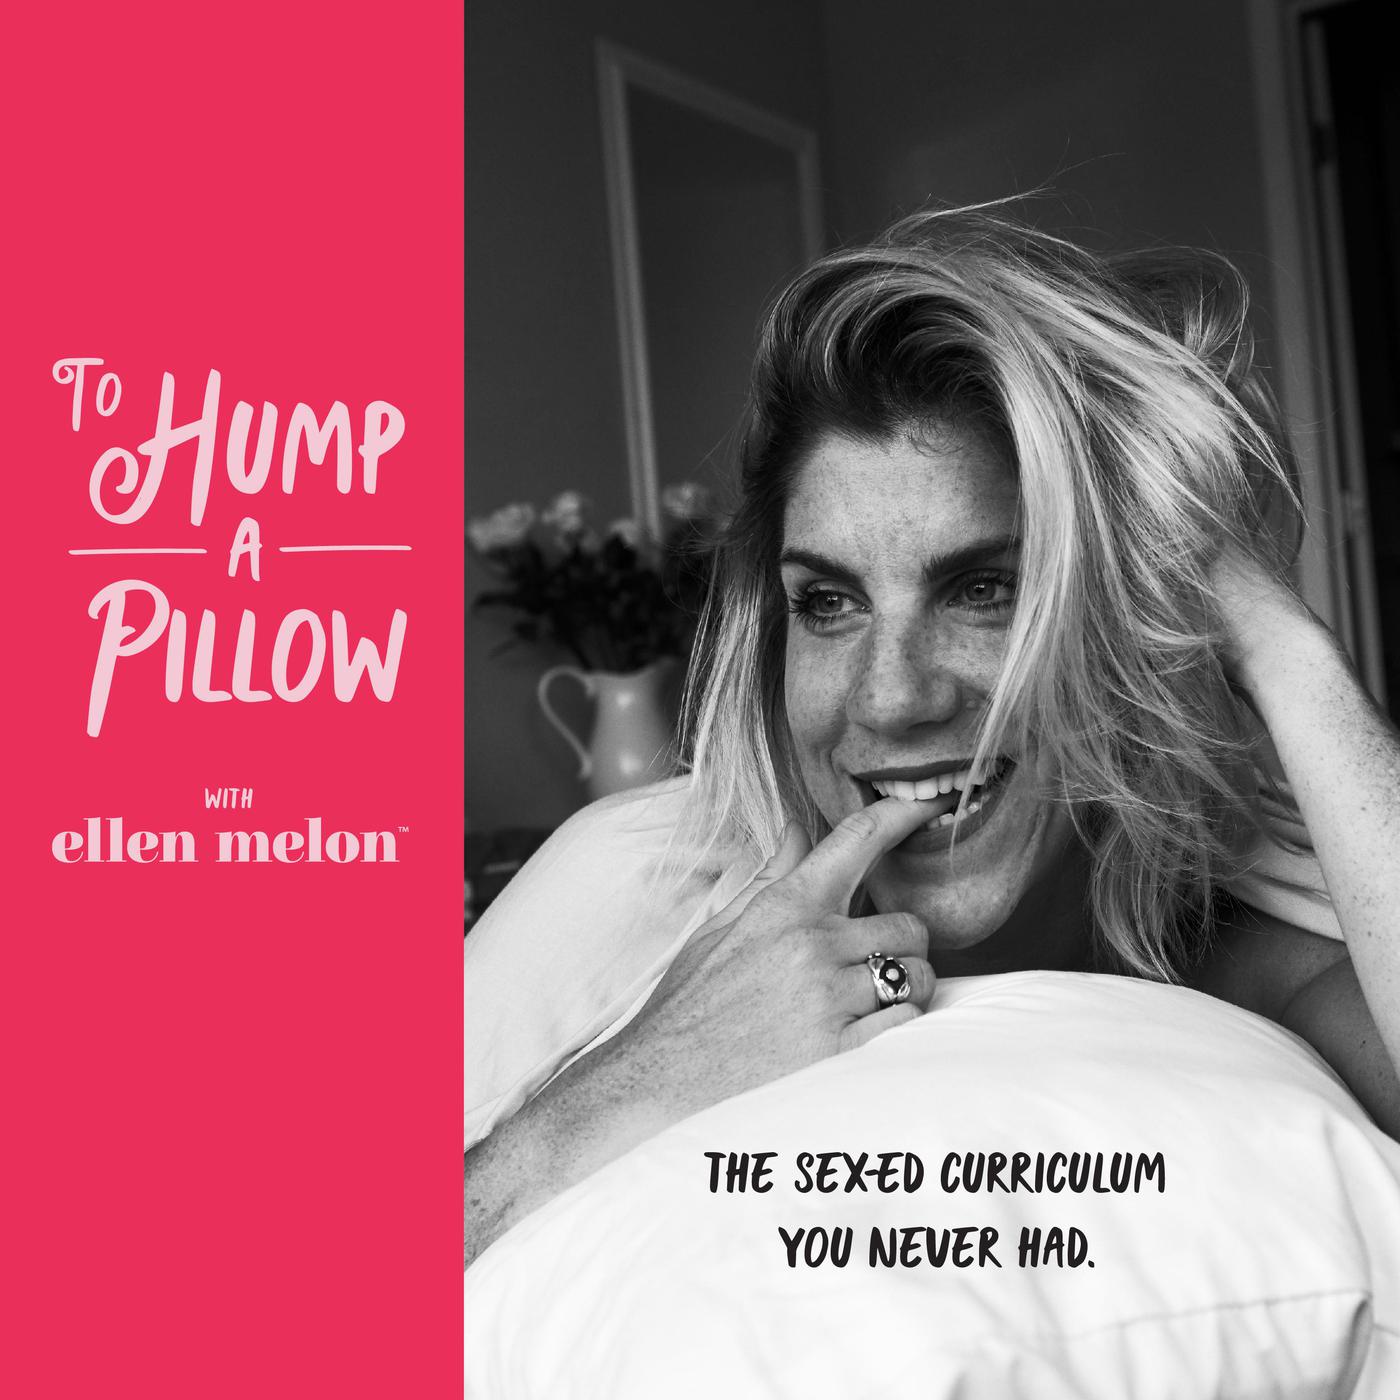 chase simons share how to hump a pillow step by step with pictures photos